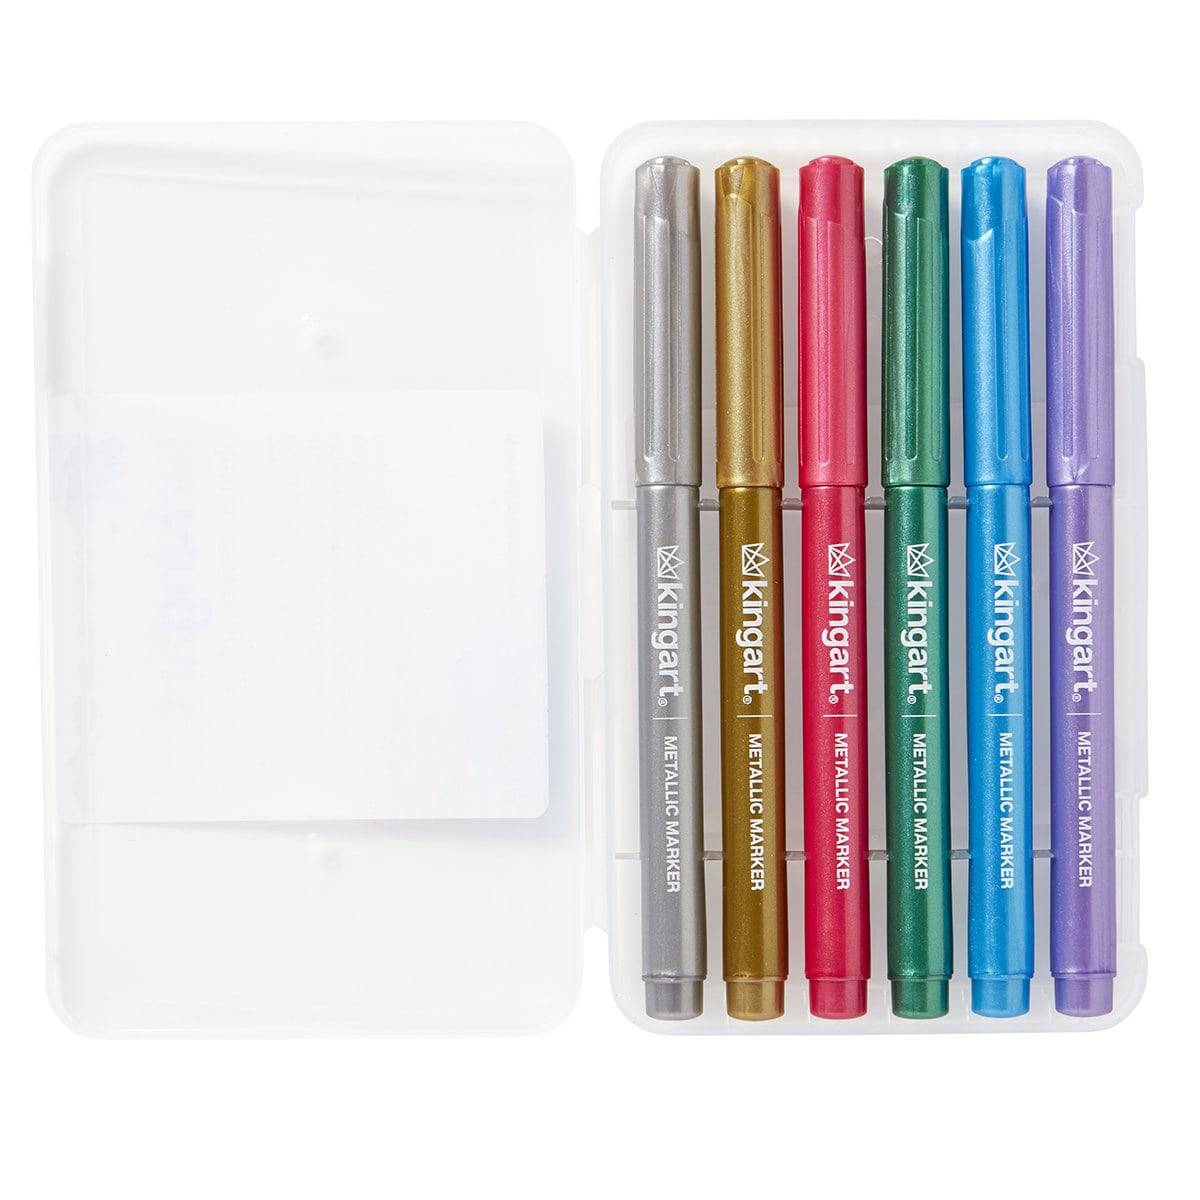 KINGART? Metallic Markers with Travel Case, Set of 6 Colors